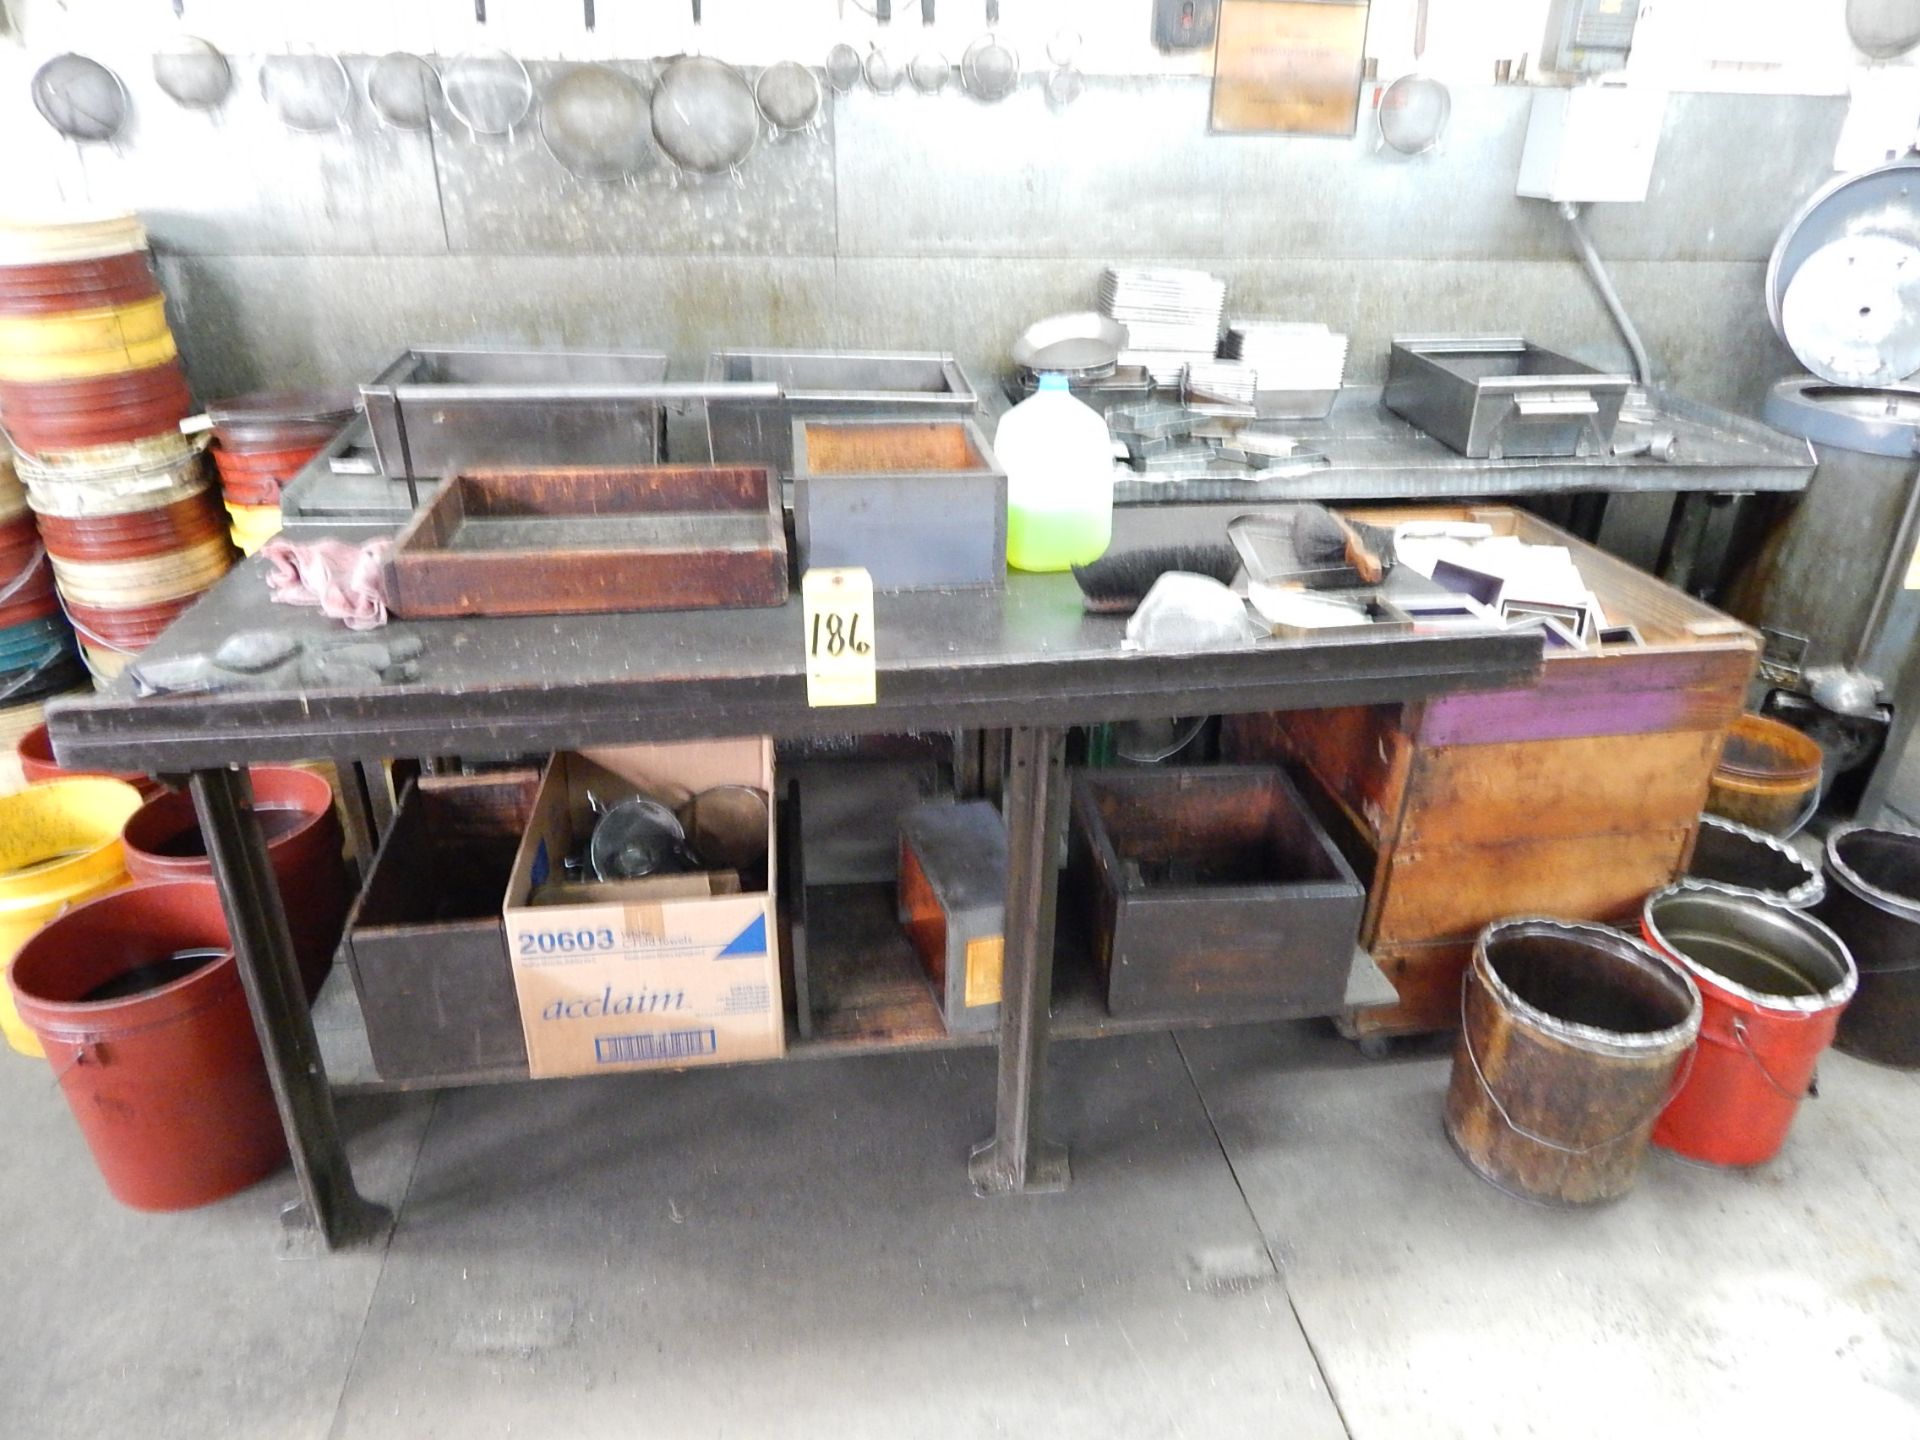 Work Benches and Contents